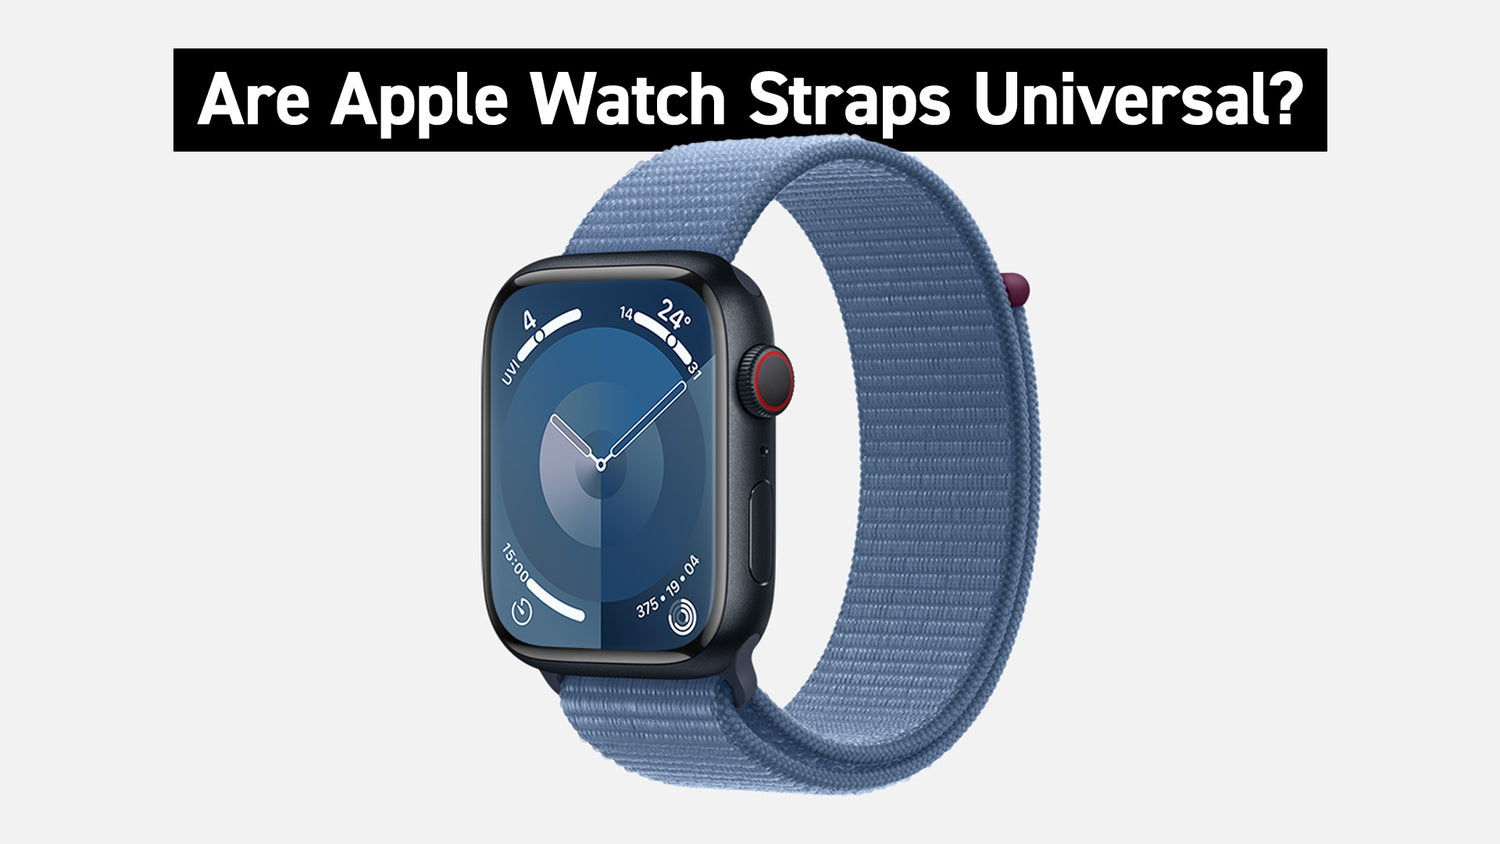 Are Apple Watch Straps Universal?